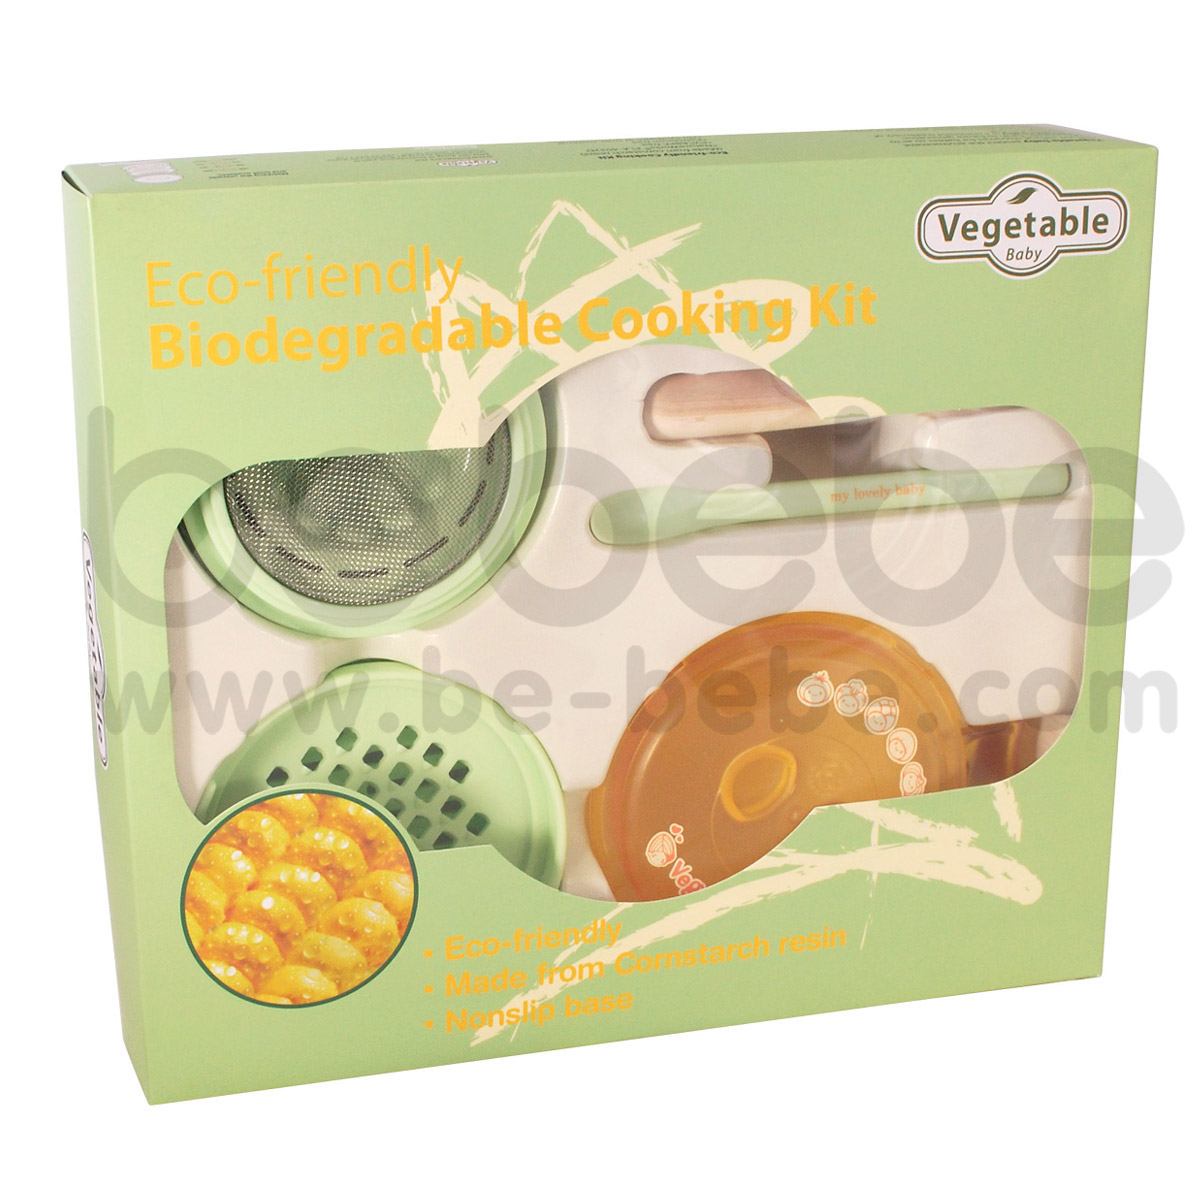 Vegetable : Baby Safe Cooking Kits from Corn